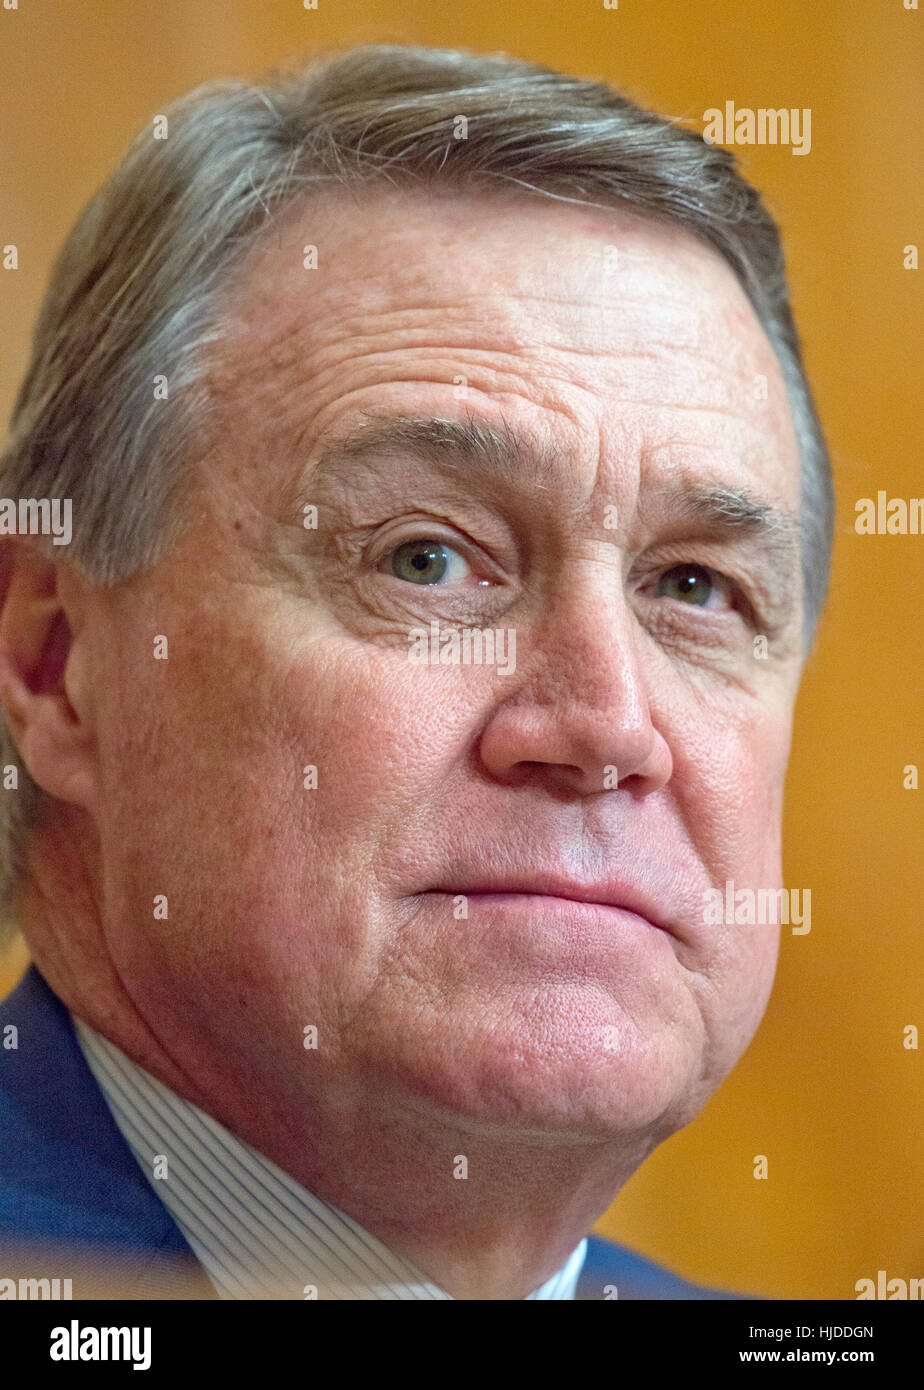 Washington, USA. 24th Jan, 2017. United States Senator David Perdue (Republican of Georgia) appears during the confirmation hearing for US Representative Mick Mulvaney (Republican of South Carolina) before the US Senate Committee on the Budget hearing considering his nomination to be Director, White House Office of Management and Budget (OMB) on Capitol Hill in Washington, DC. Credit: Ron Sachs/Consolidated News Photos/Ron Sachs - CNP/dpa/Alamy Live News Stock Photo